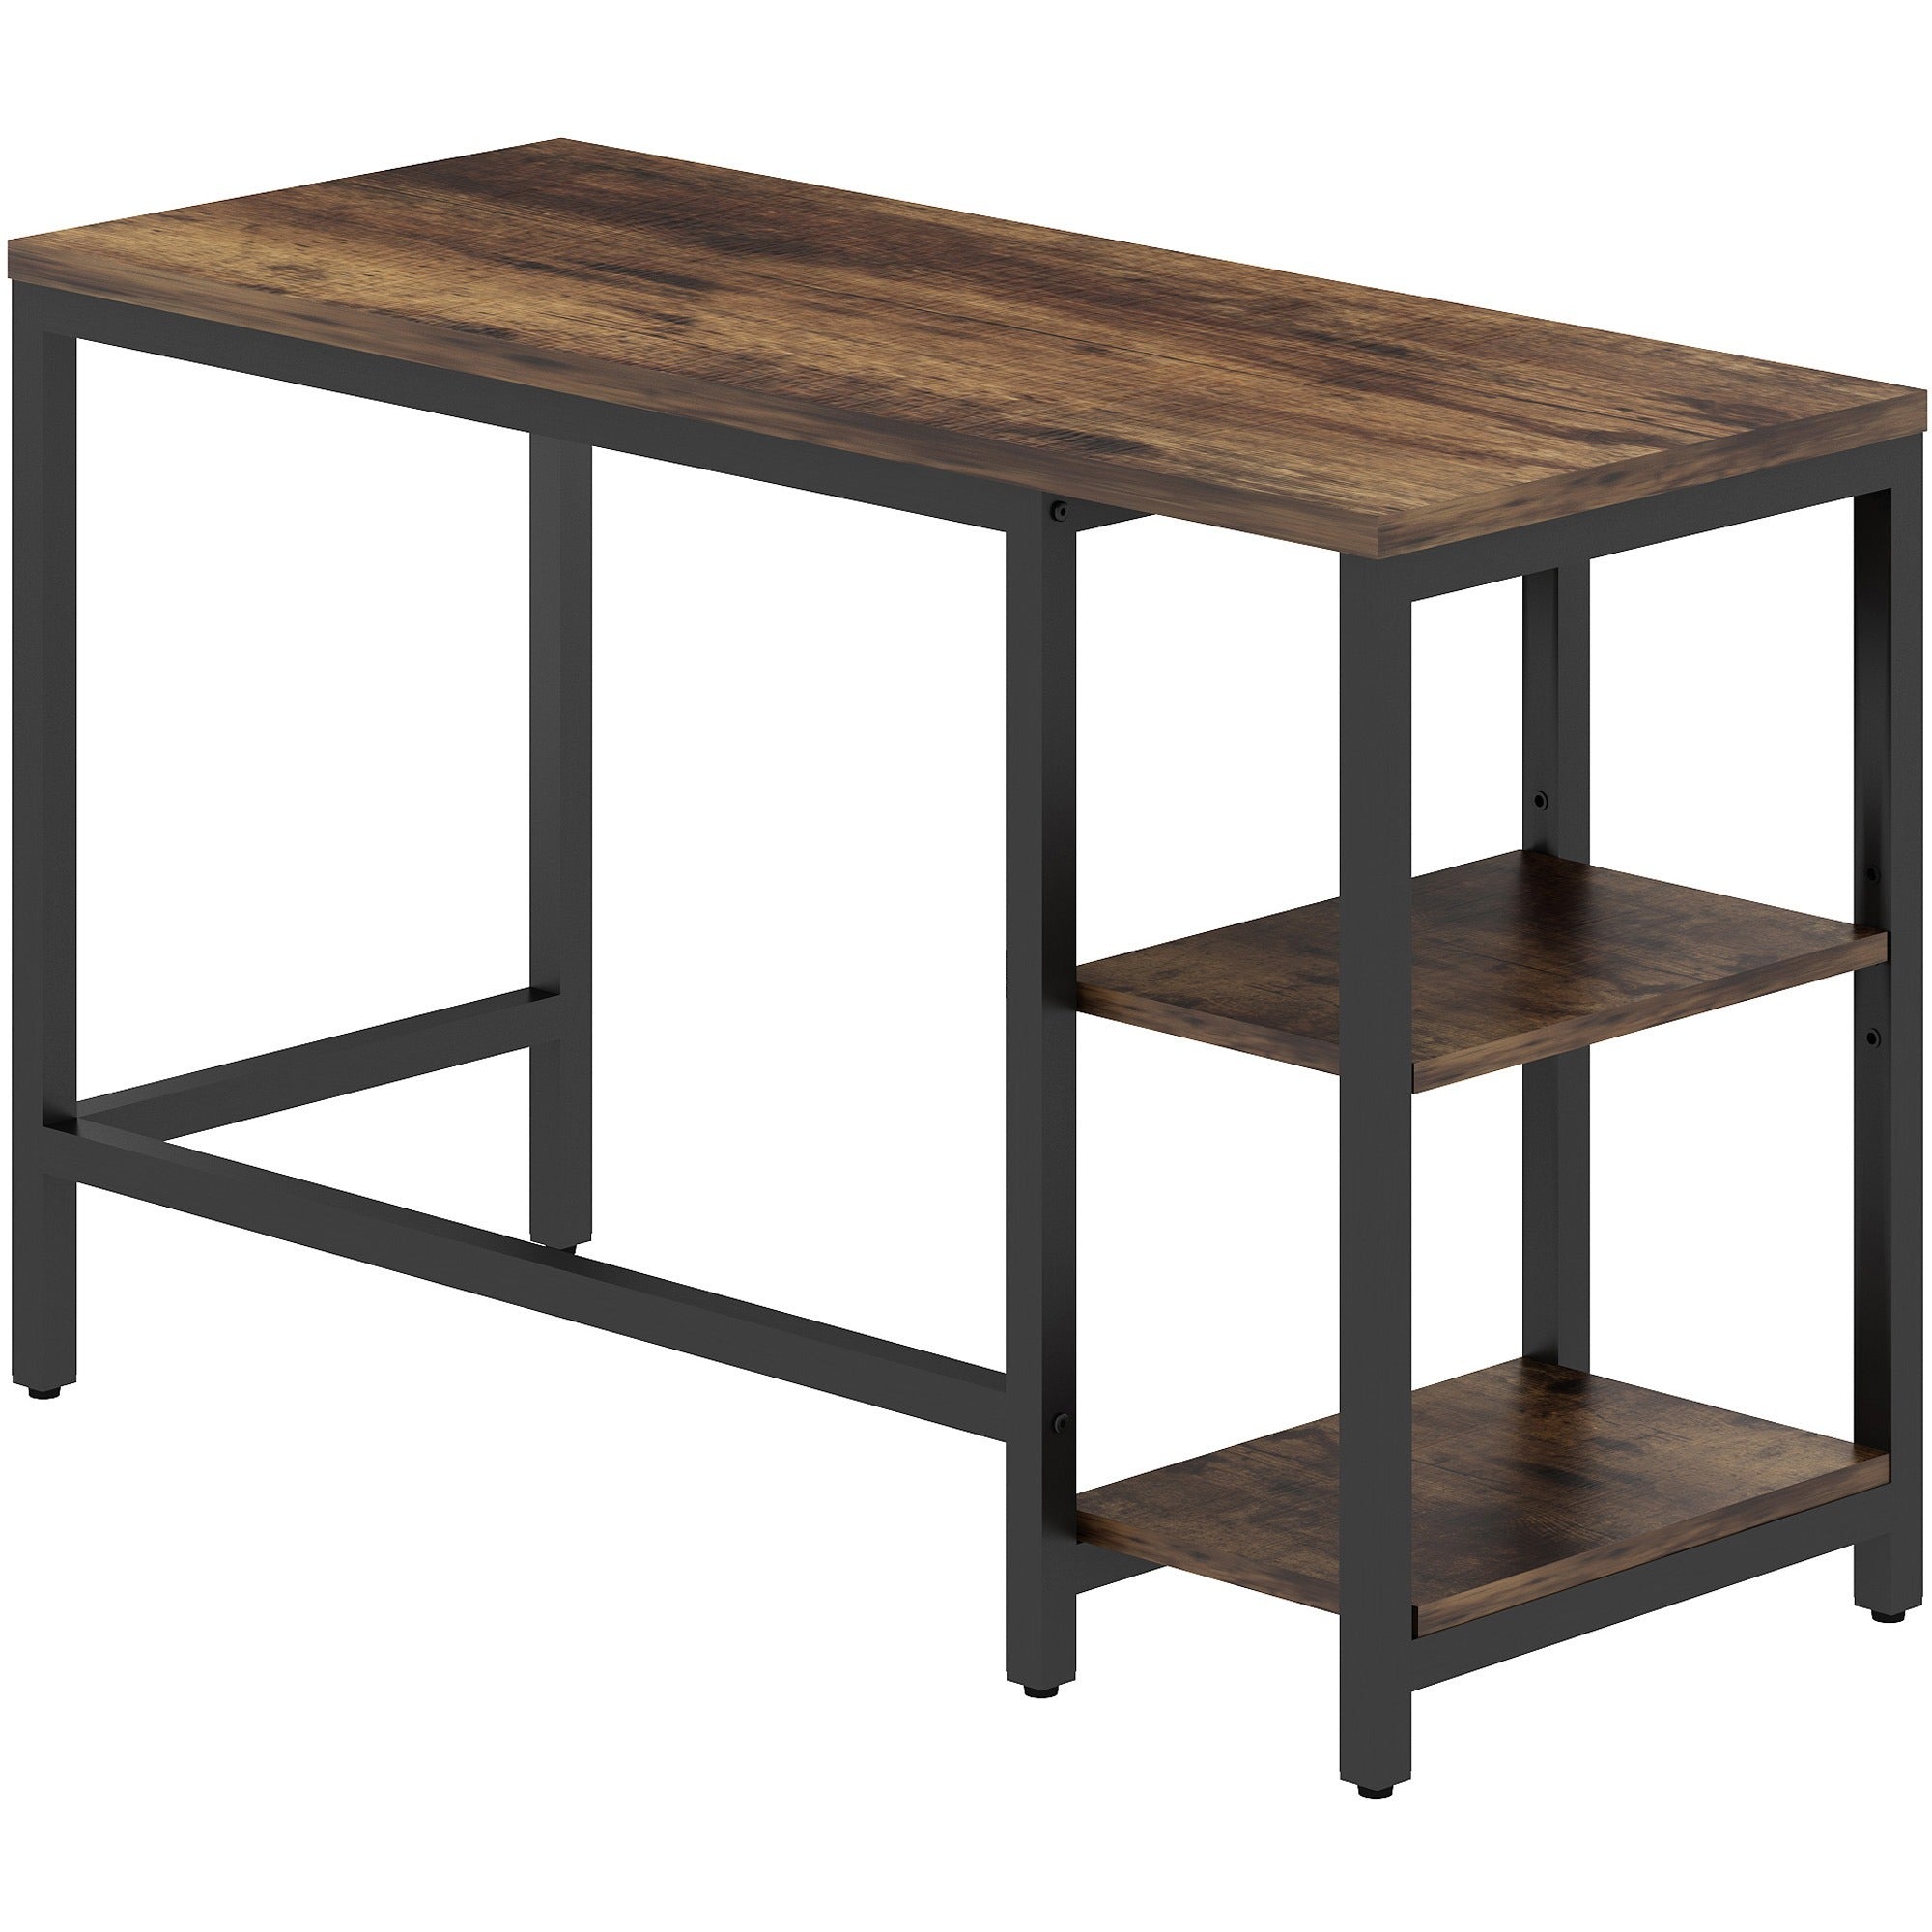 NuSparc Metal Frame Desk - For - Table TopVintage Oak, Black Top - Contemporary Style - 220 lb Capacity x 47.20" Table Top Width x 19.70" Table Top Depth x 1" Table Top Thickness - 29.50" Height - Assembly Required - High Pressure Laminate (HPL) Top - 2